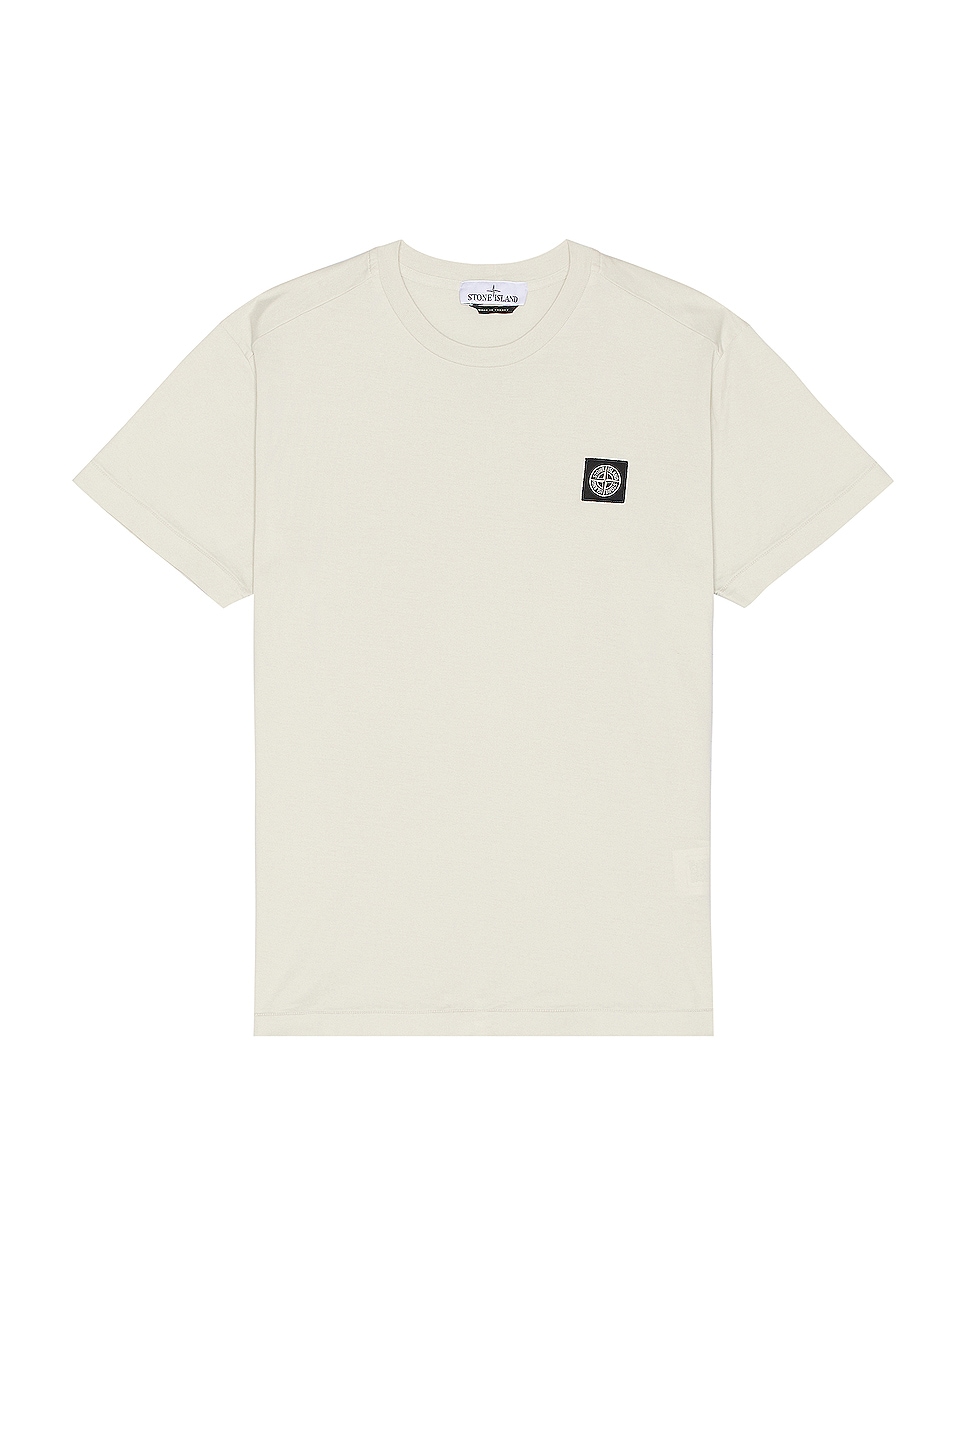 Image 1 of Stone Island T-shirt in Plaster